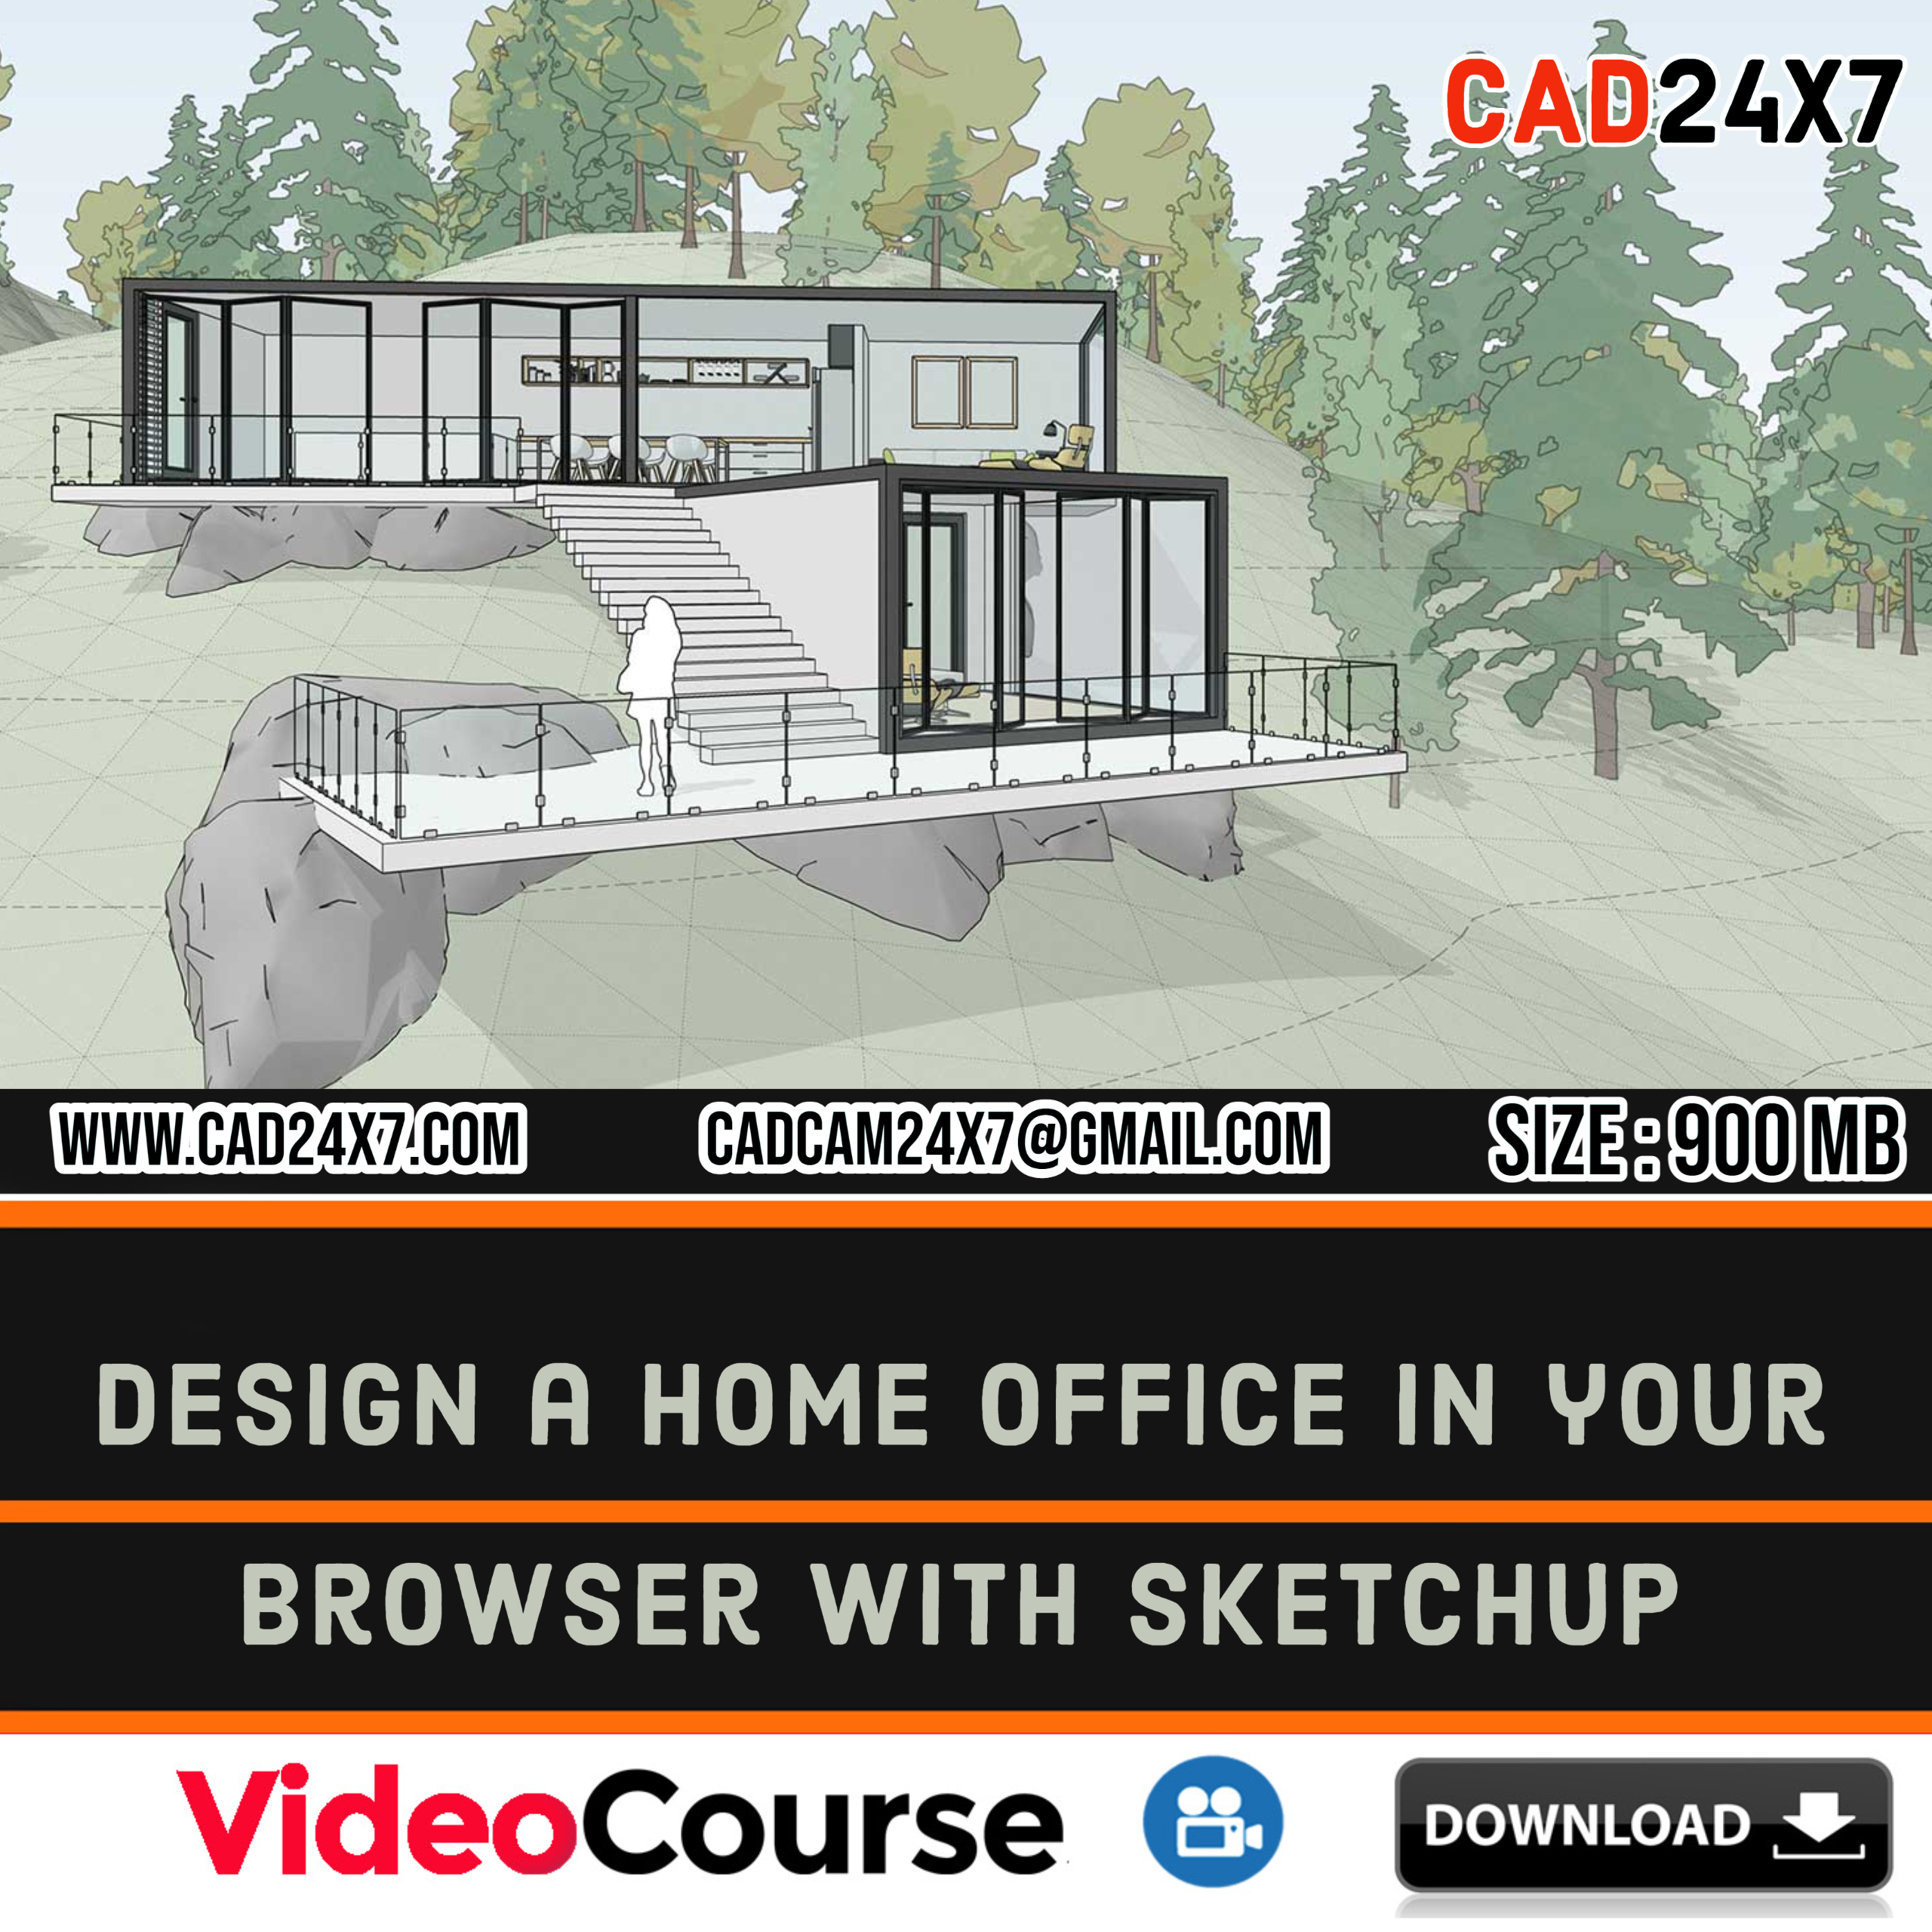 Design a Home Office in our Browser with Sketchup